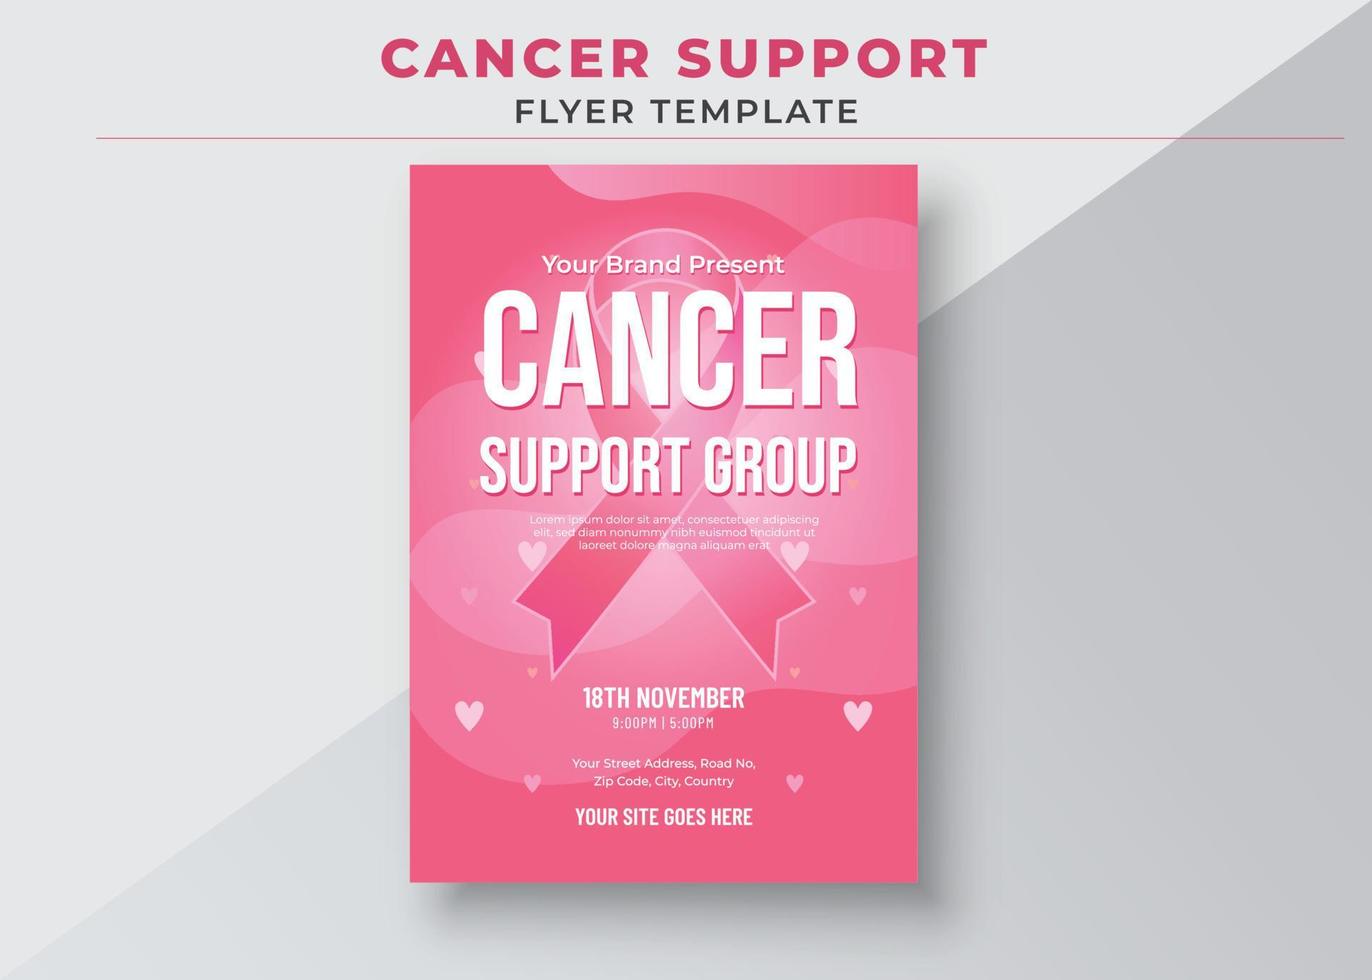 Cancer Support Group Flyers Template, Breast Cancer Support Group flyer vector